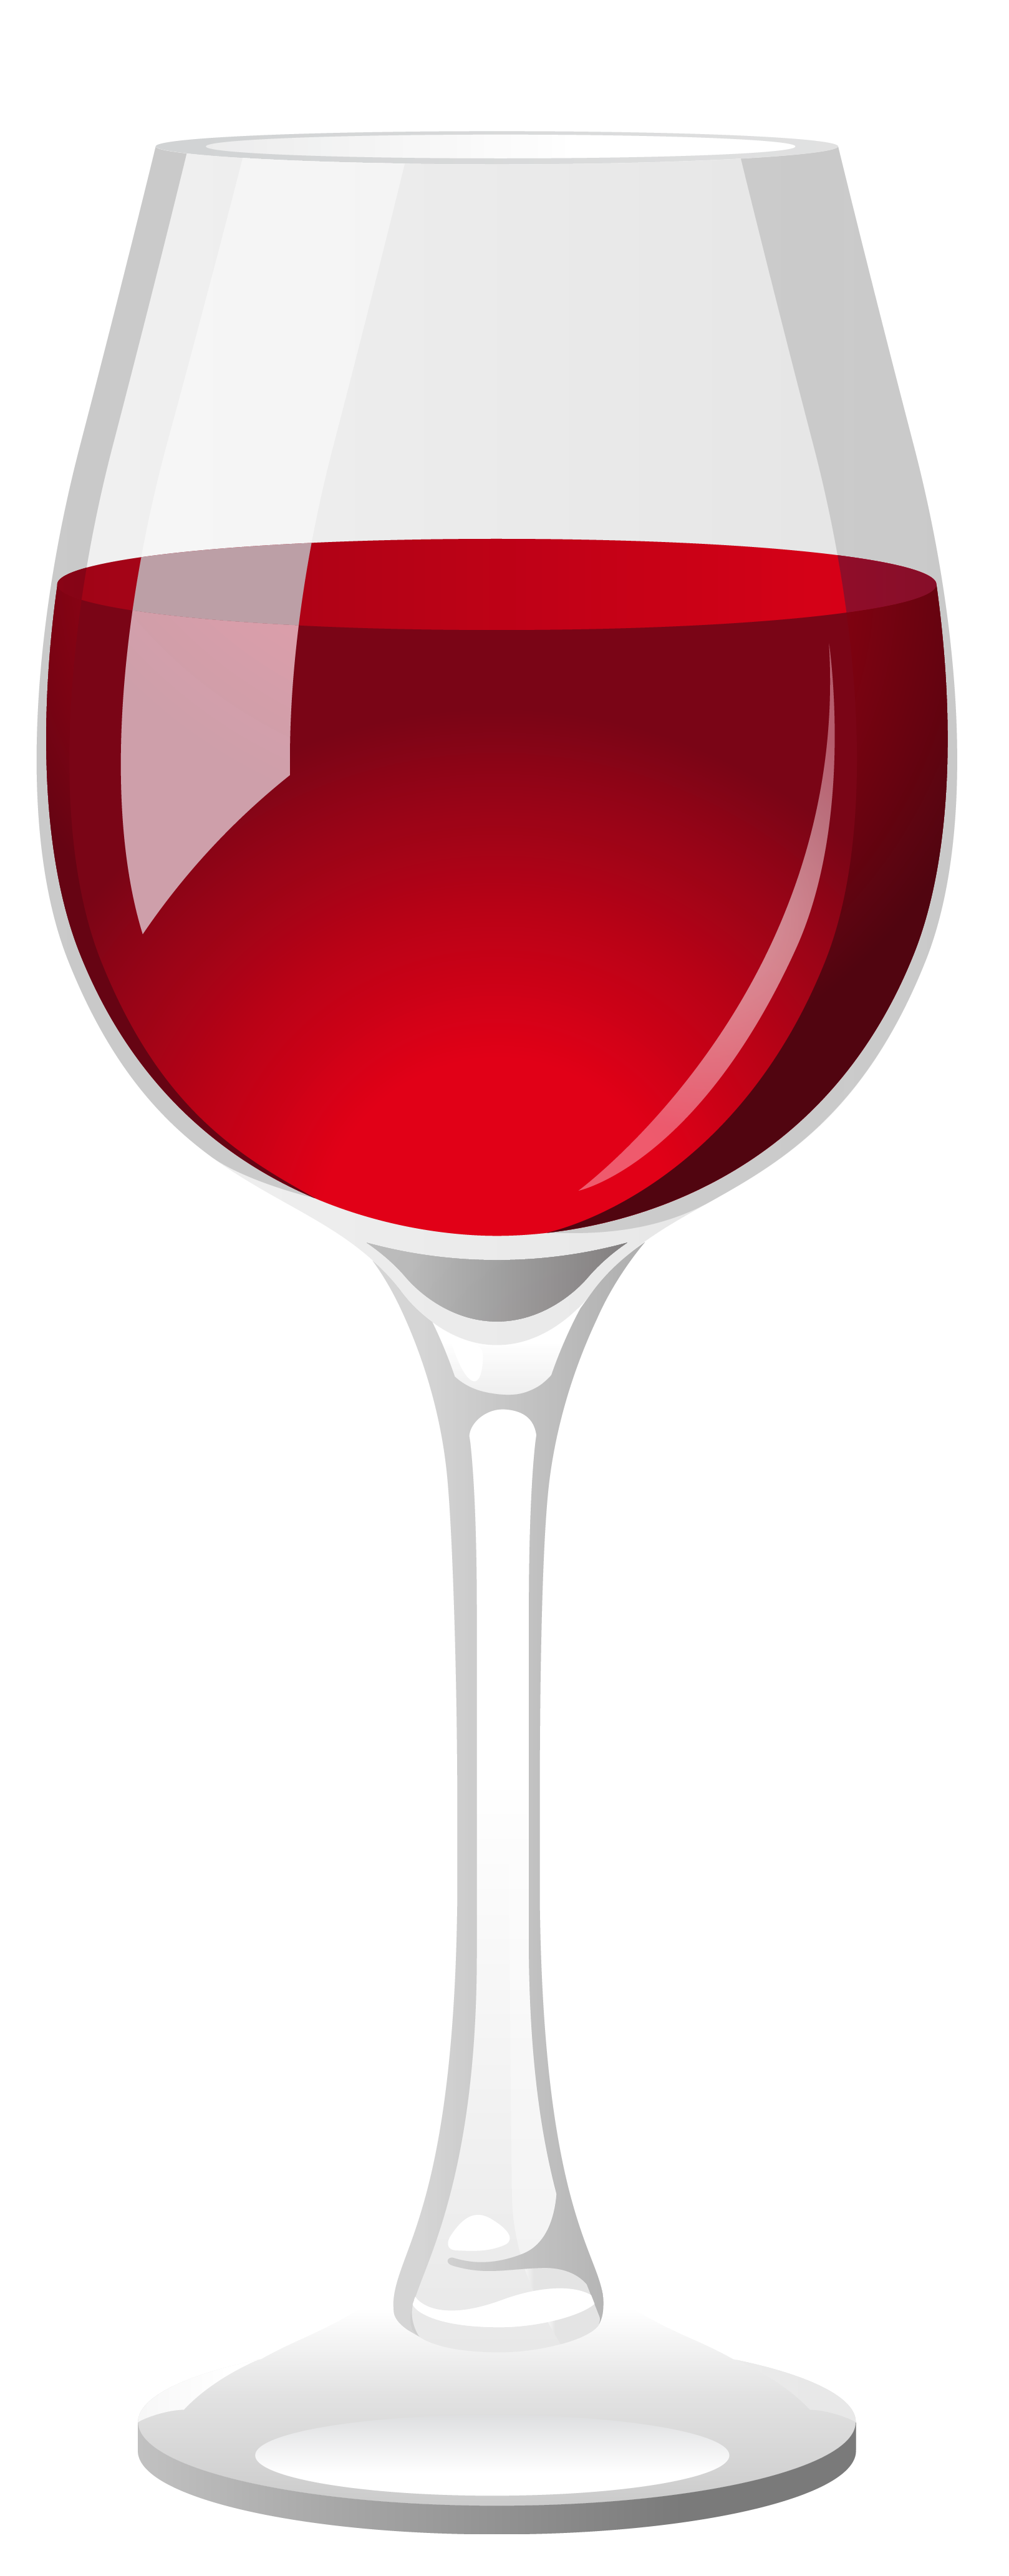 https://pics.clipartpng.com/Red_Wine_Glass_PNG_Clipart-158.png